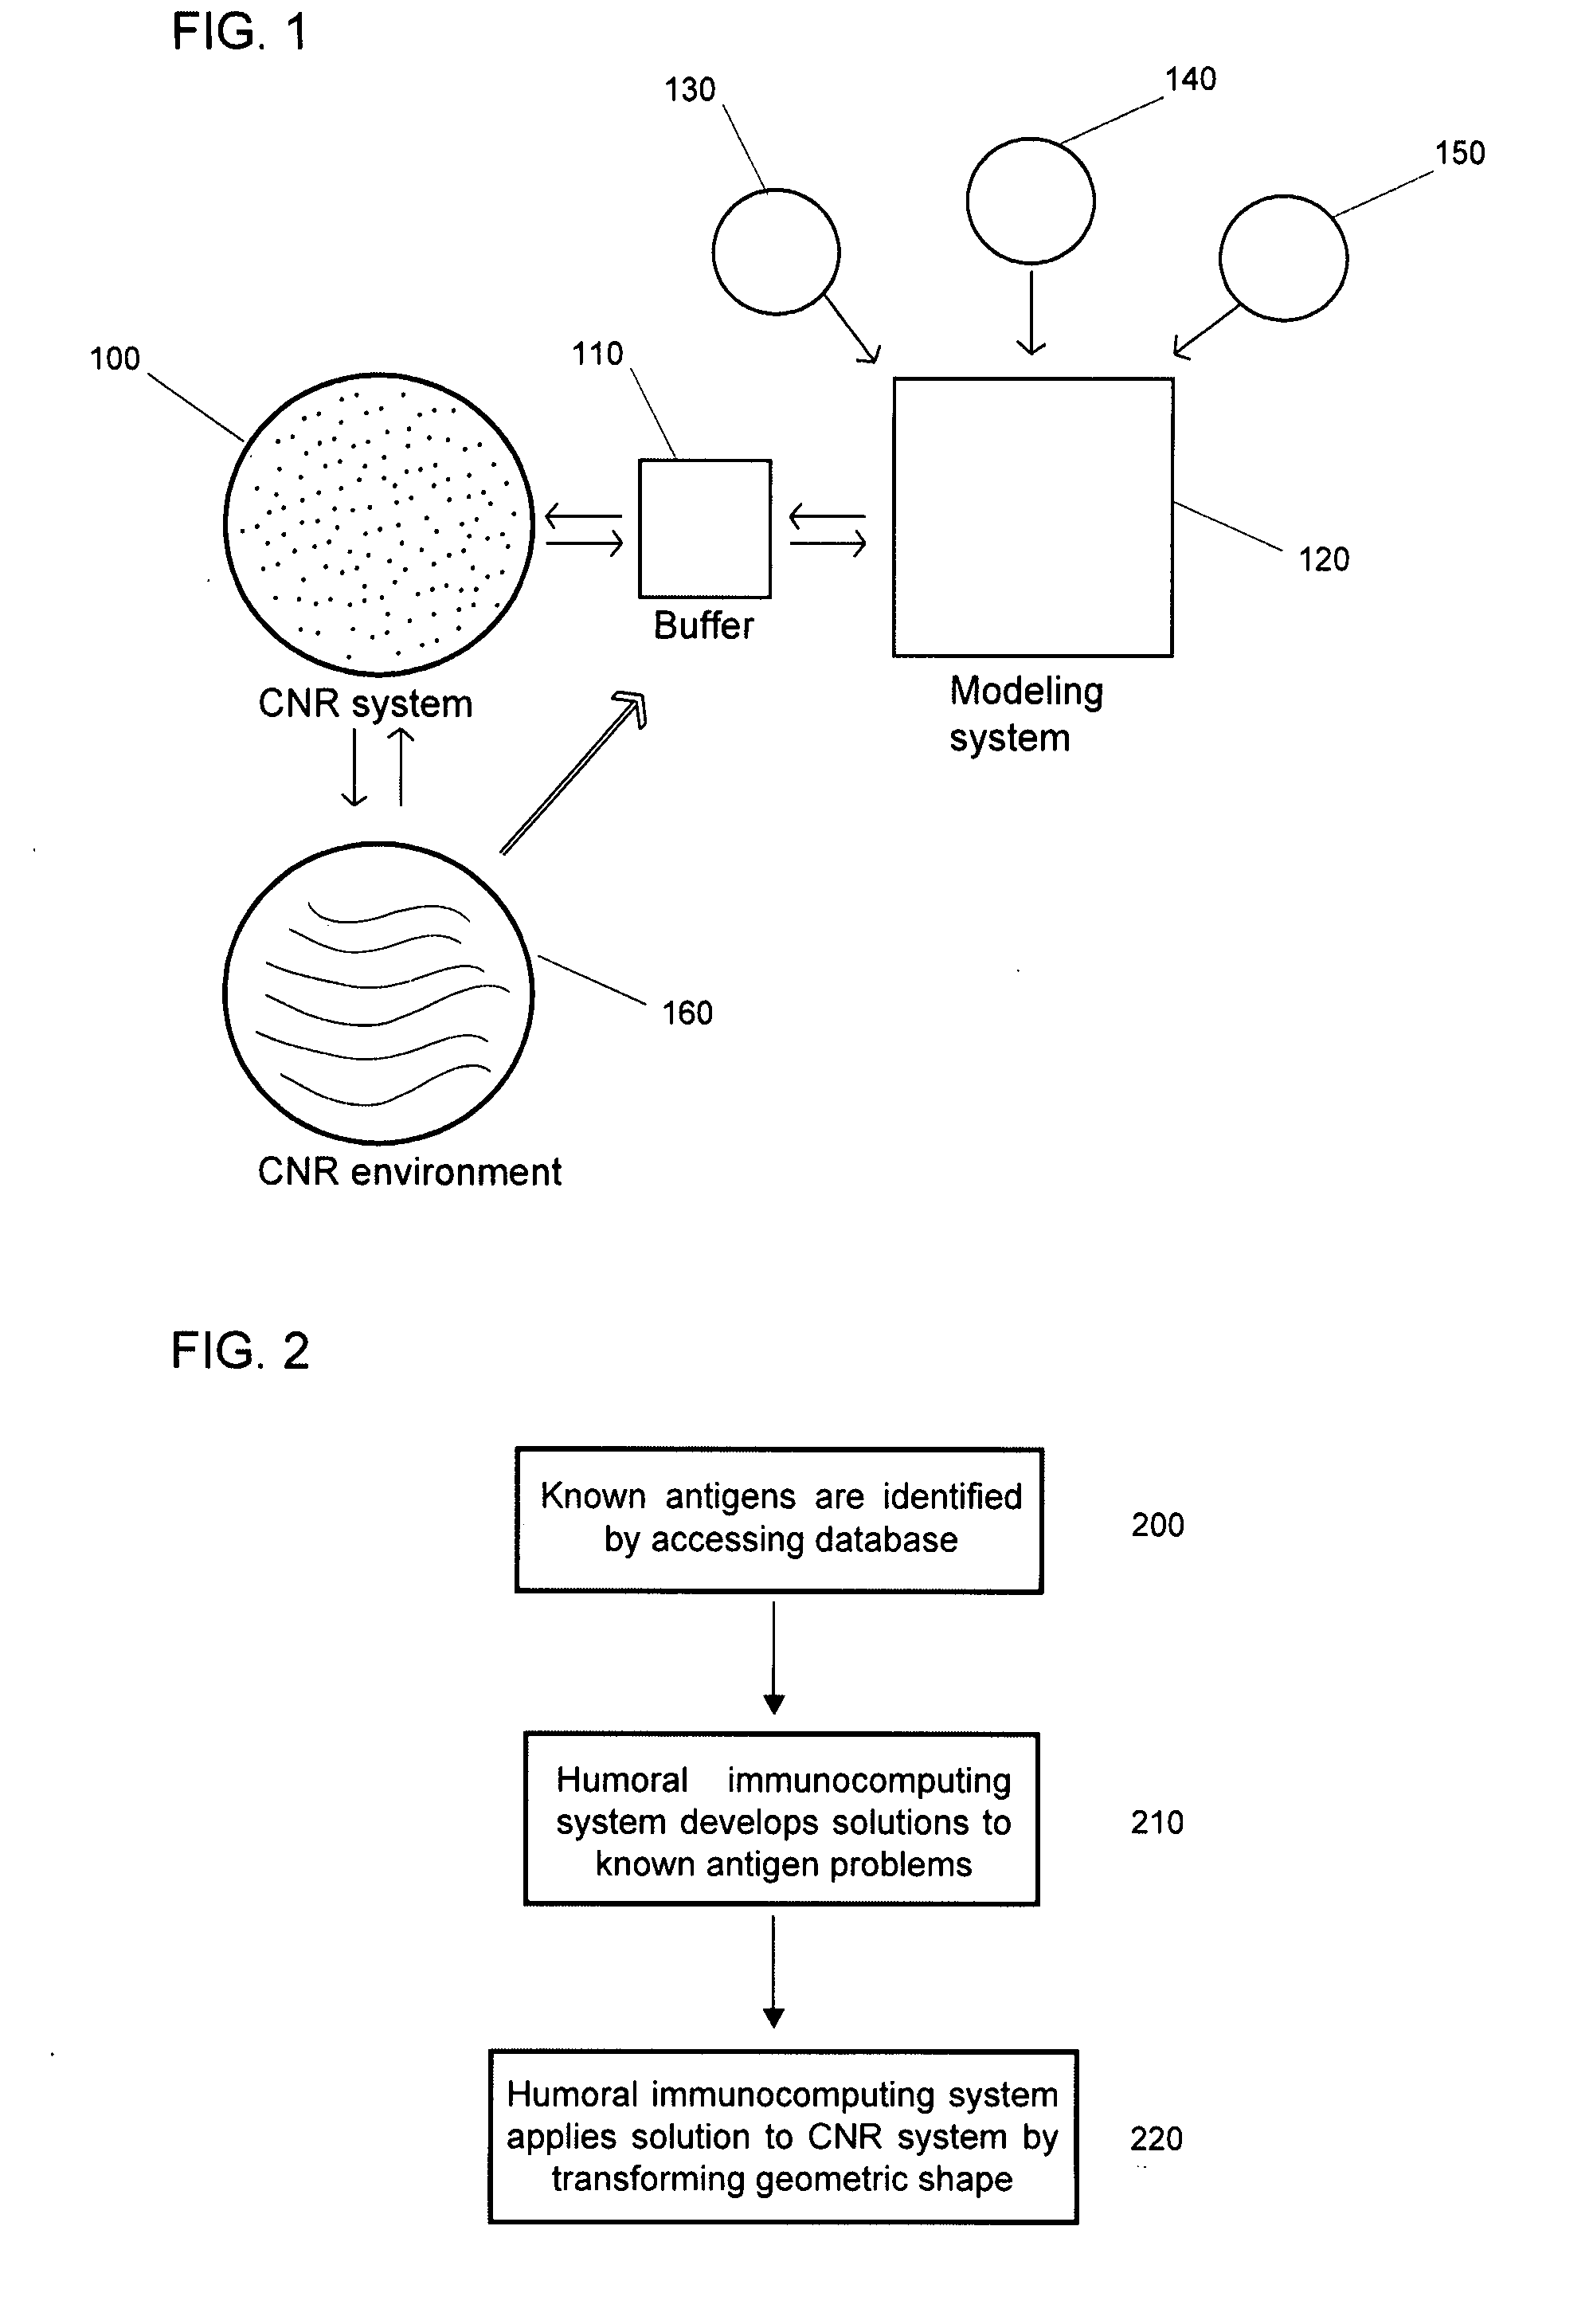 System and methods for immunocomputing applied to collectives of nanorobots